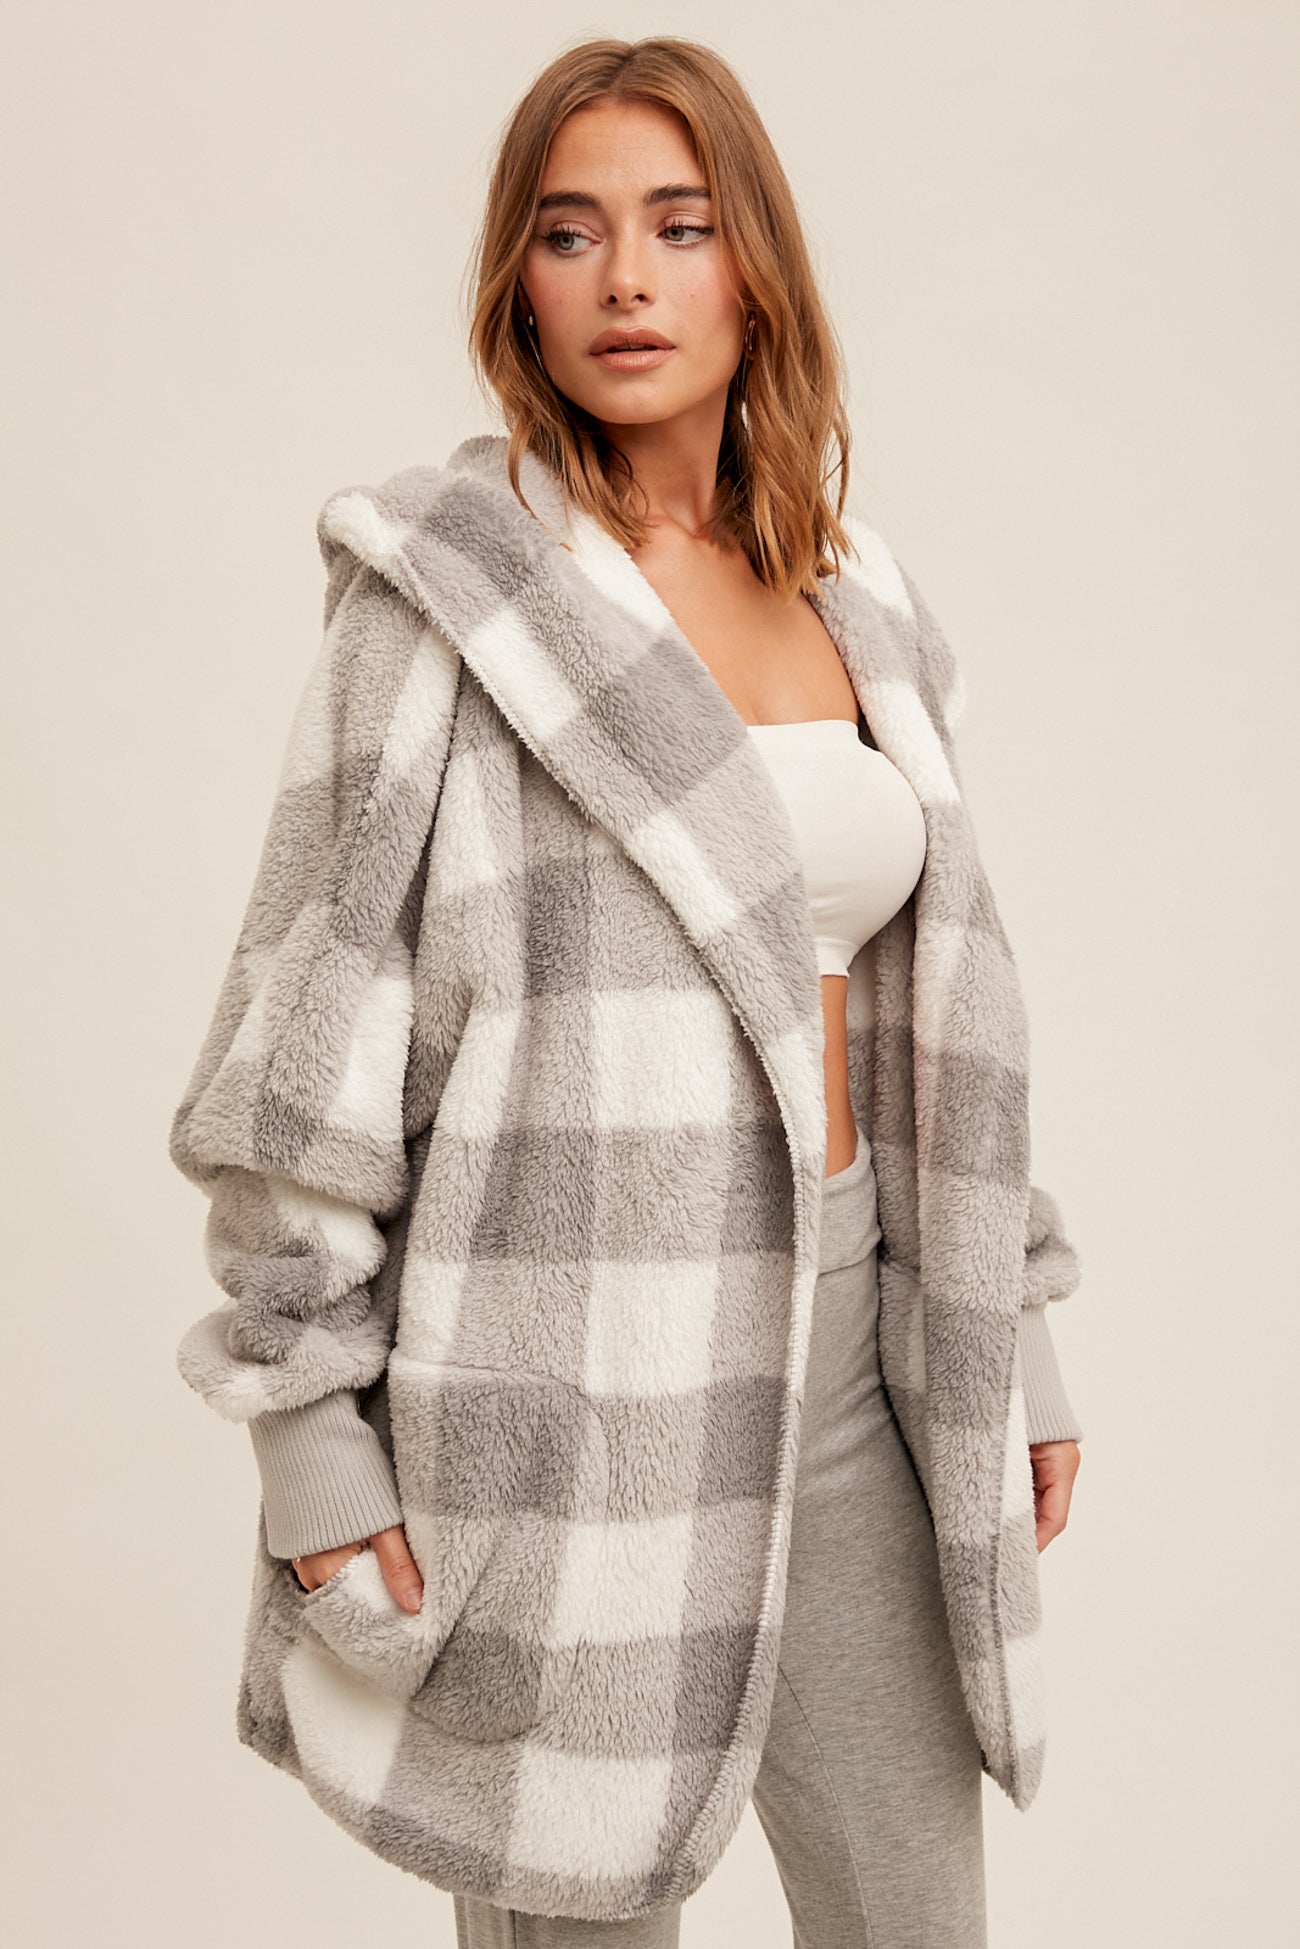 Hem and Thread Grey and White Check Jacket